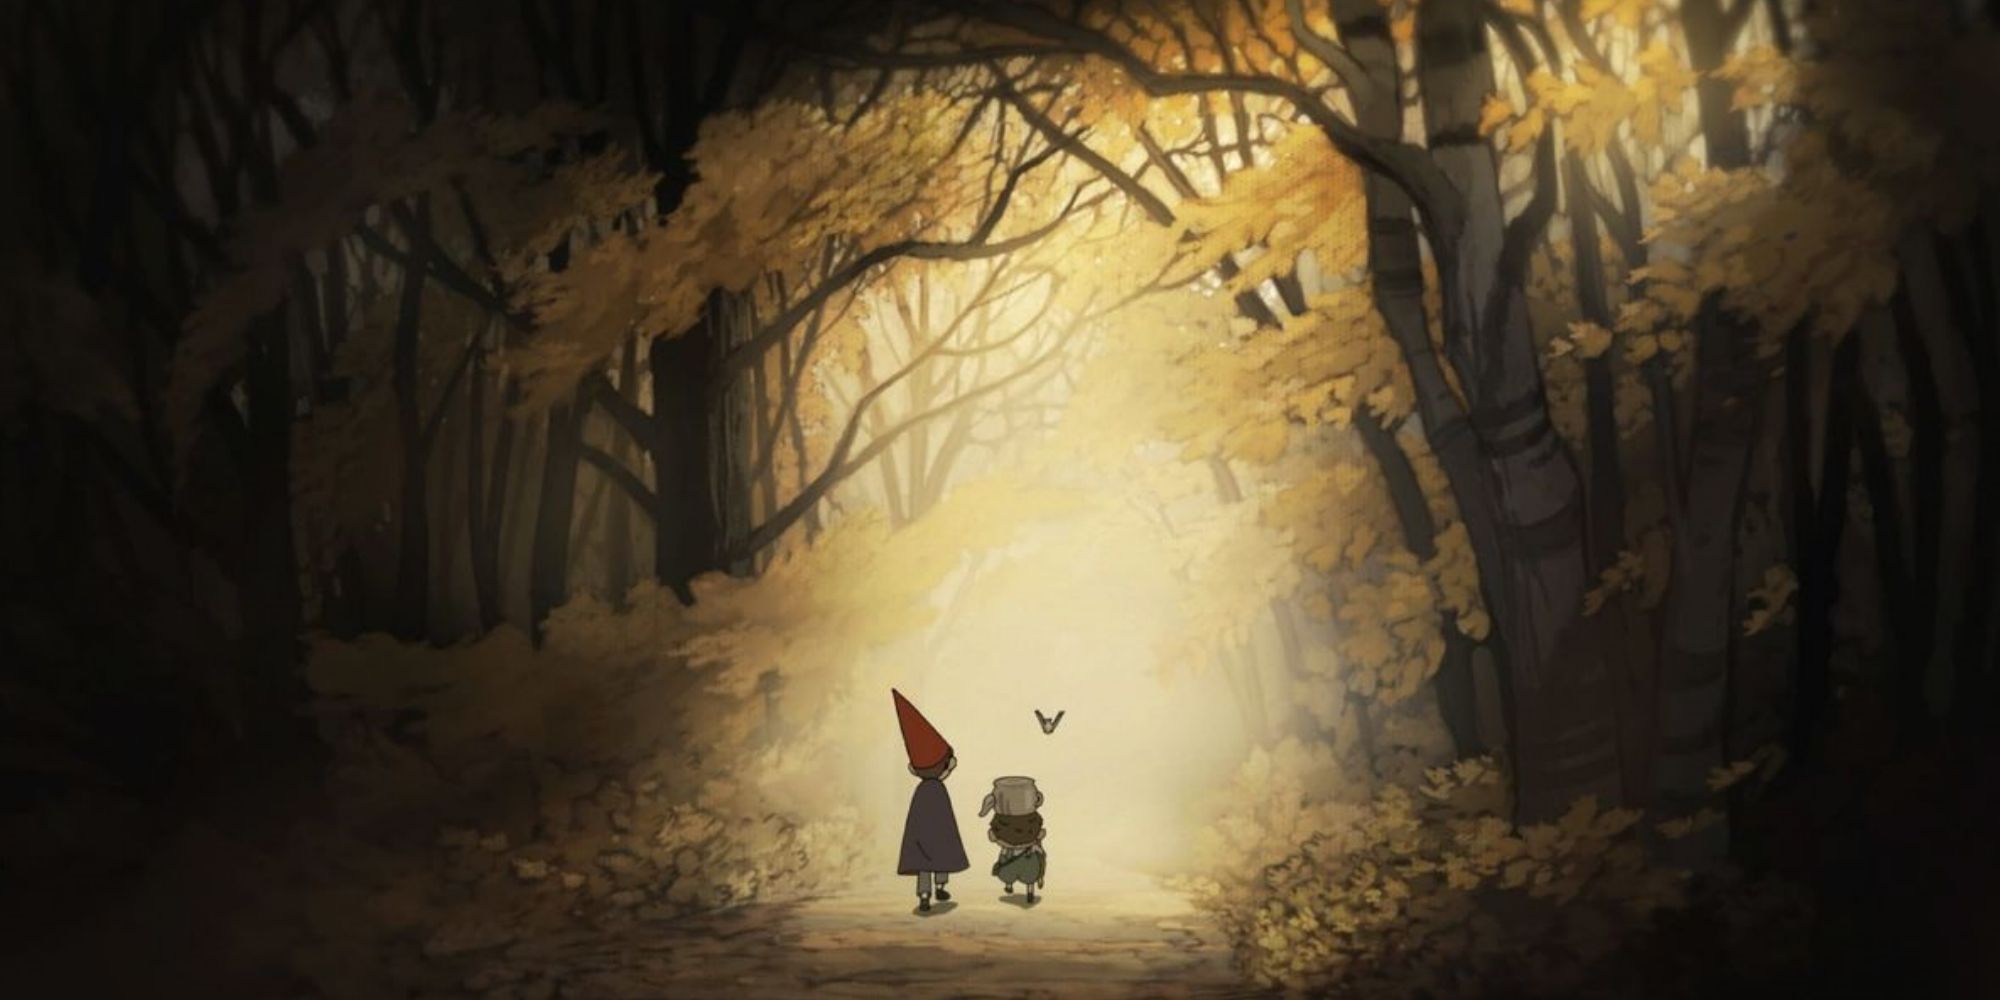 Wirt and Greg walking through the forest in 'Over the Garden Wall'